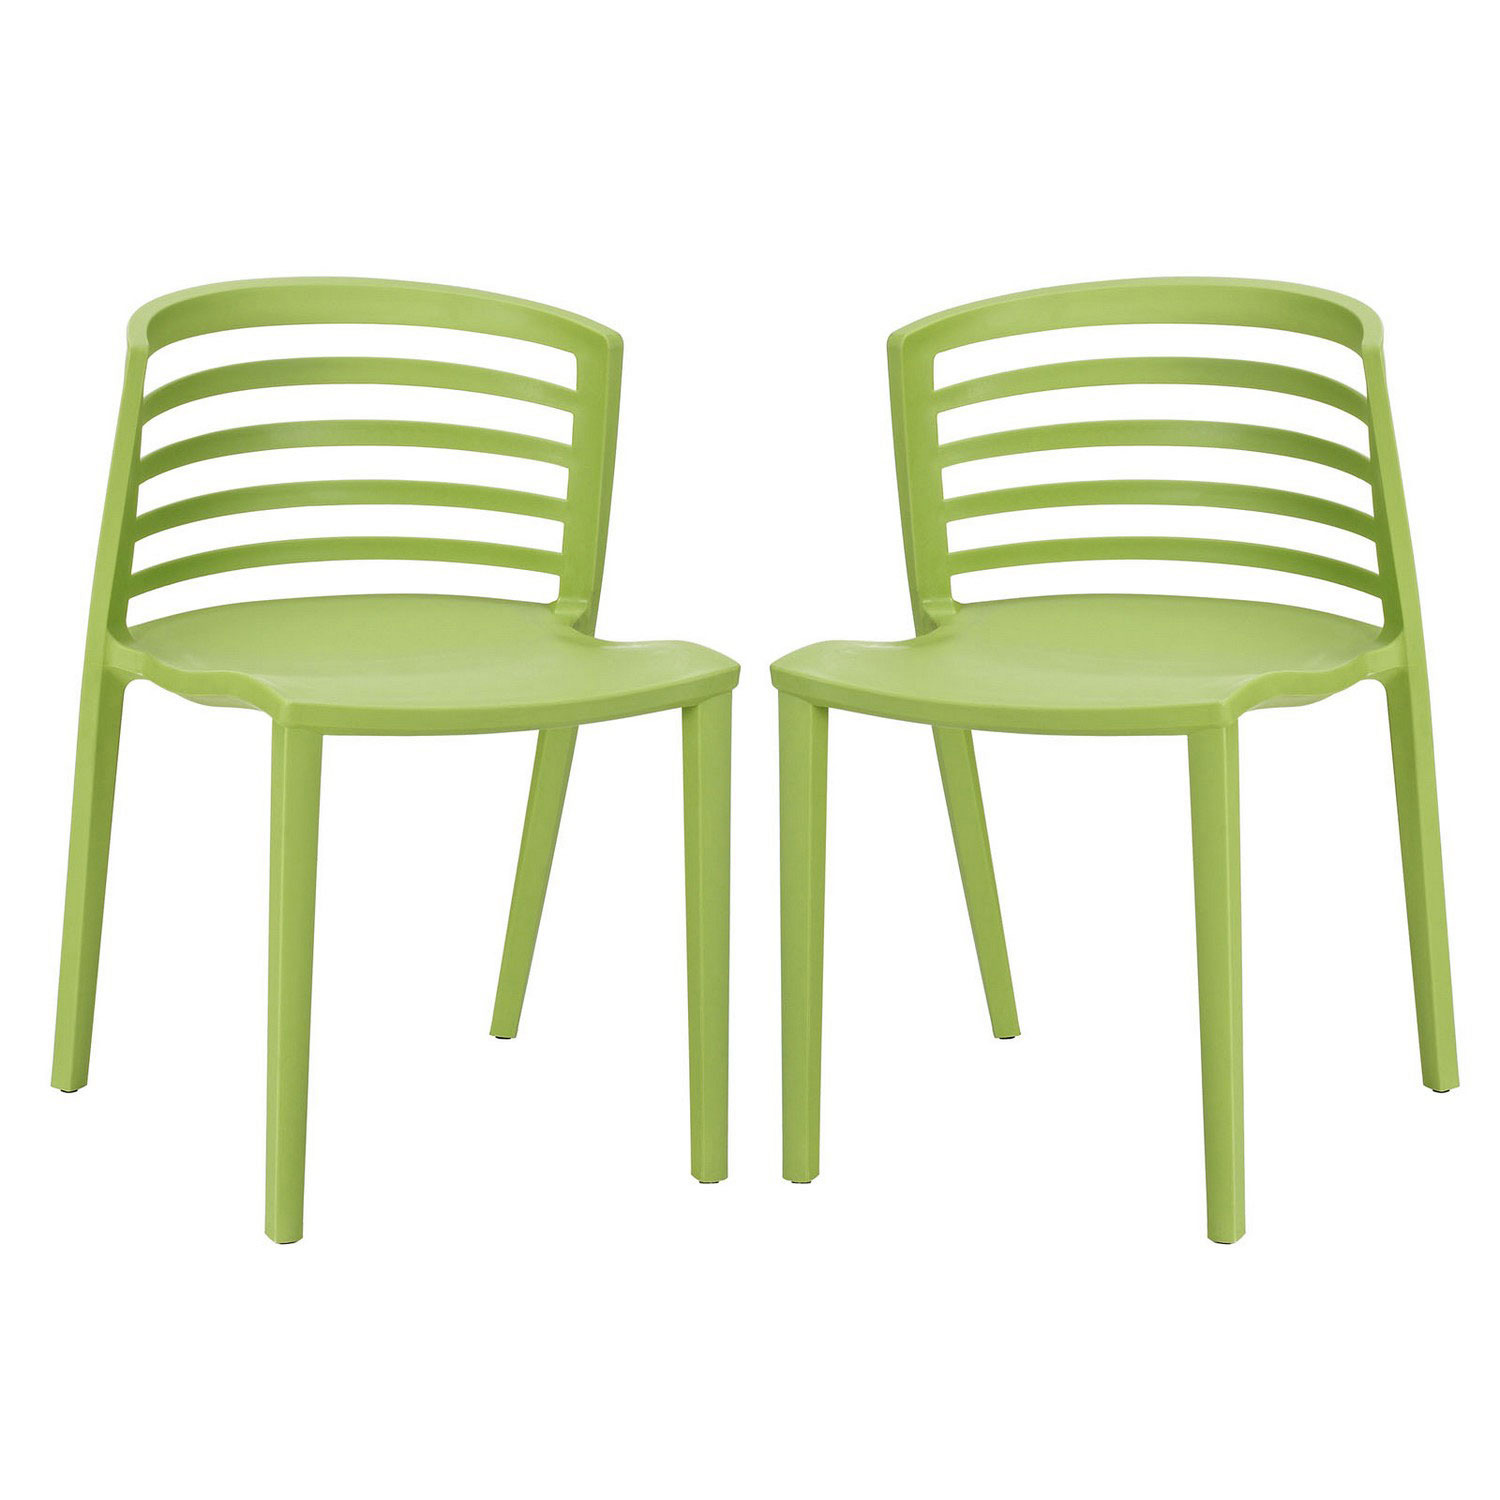 Modway Curvy Dining Chairs Set of 2 - Green